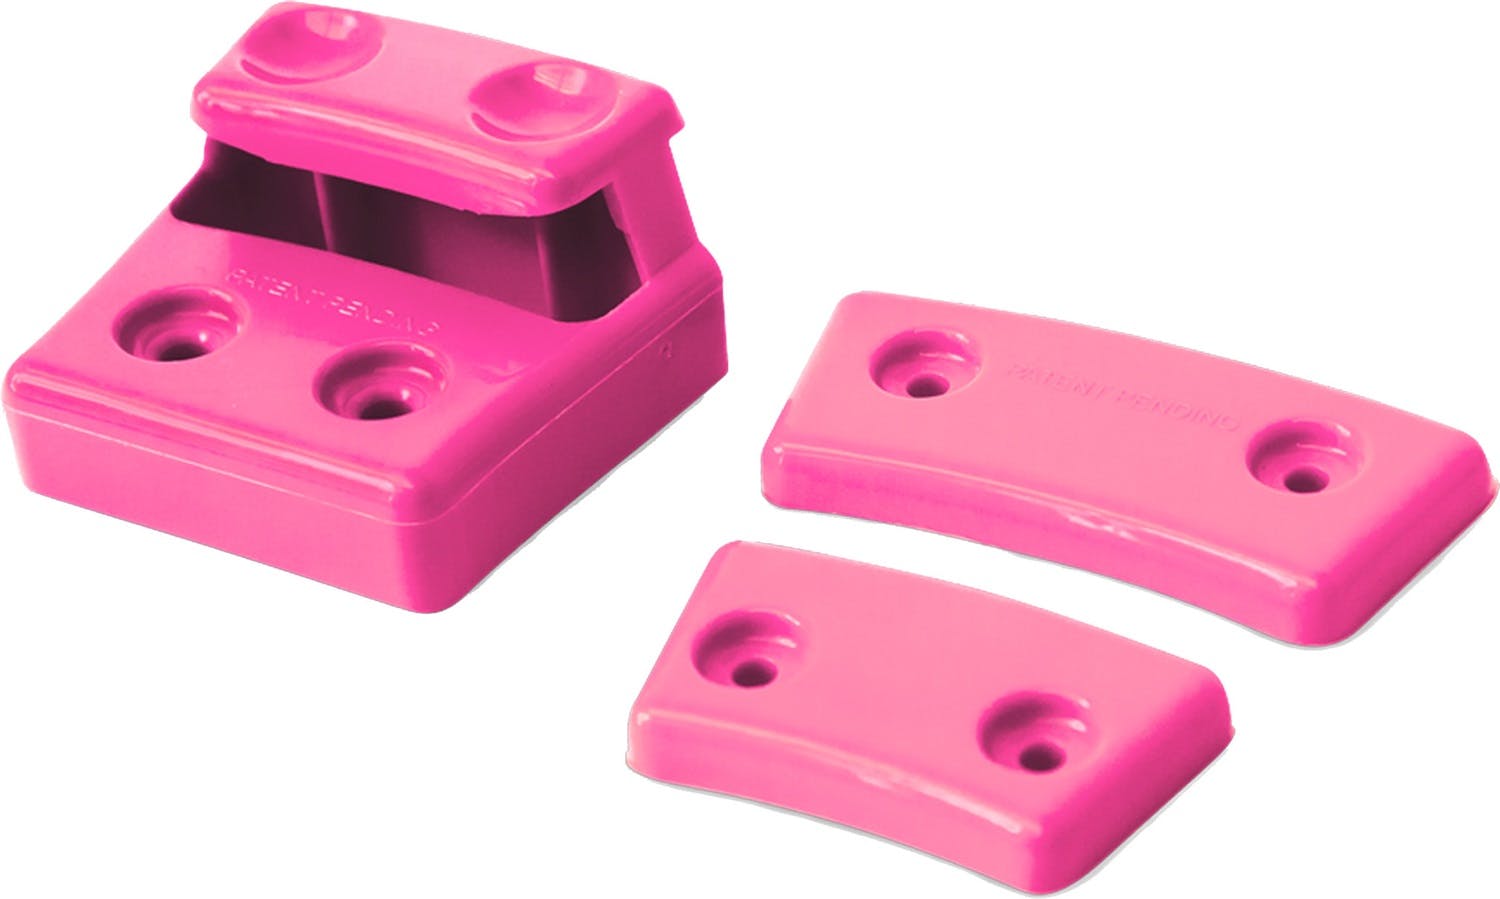 Daystar KU76148FP Cam Can Colored Replacement Cams; Fluorescent Pink